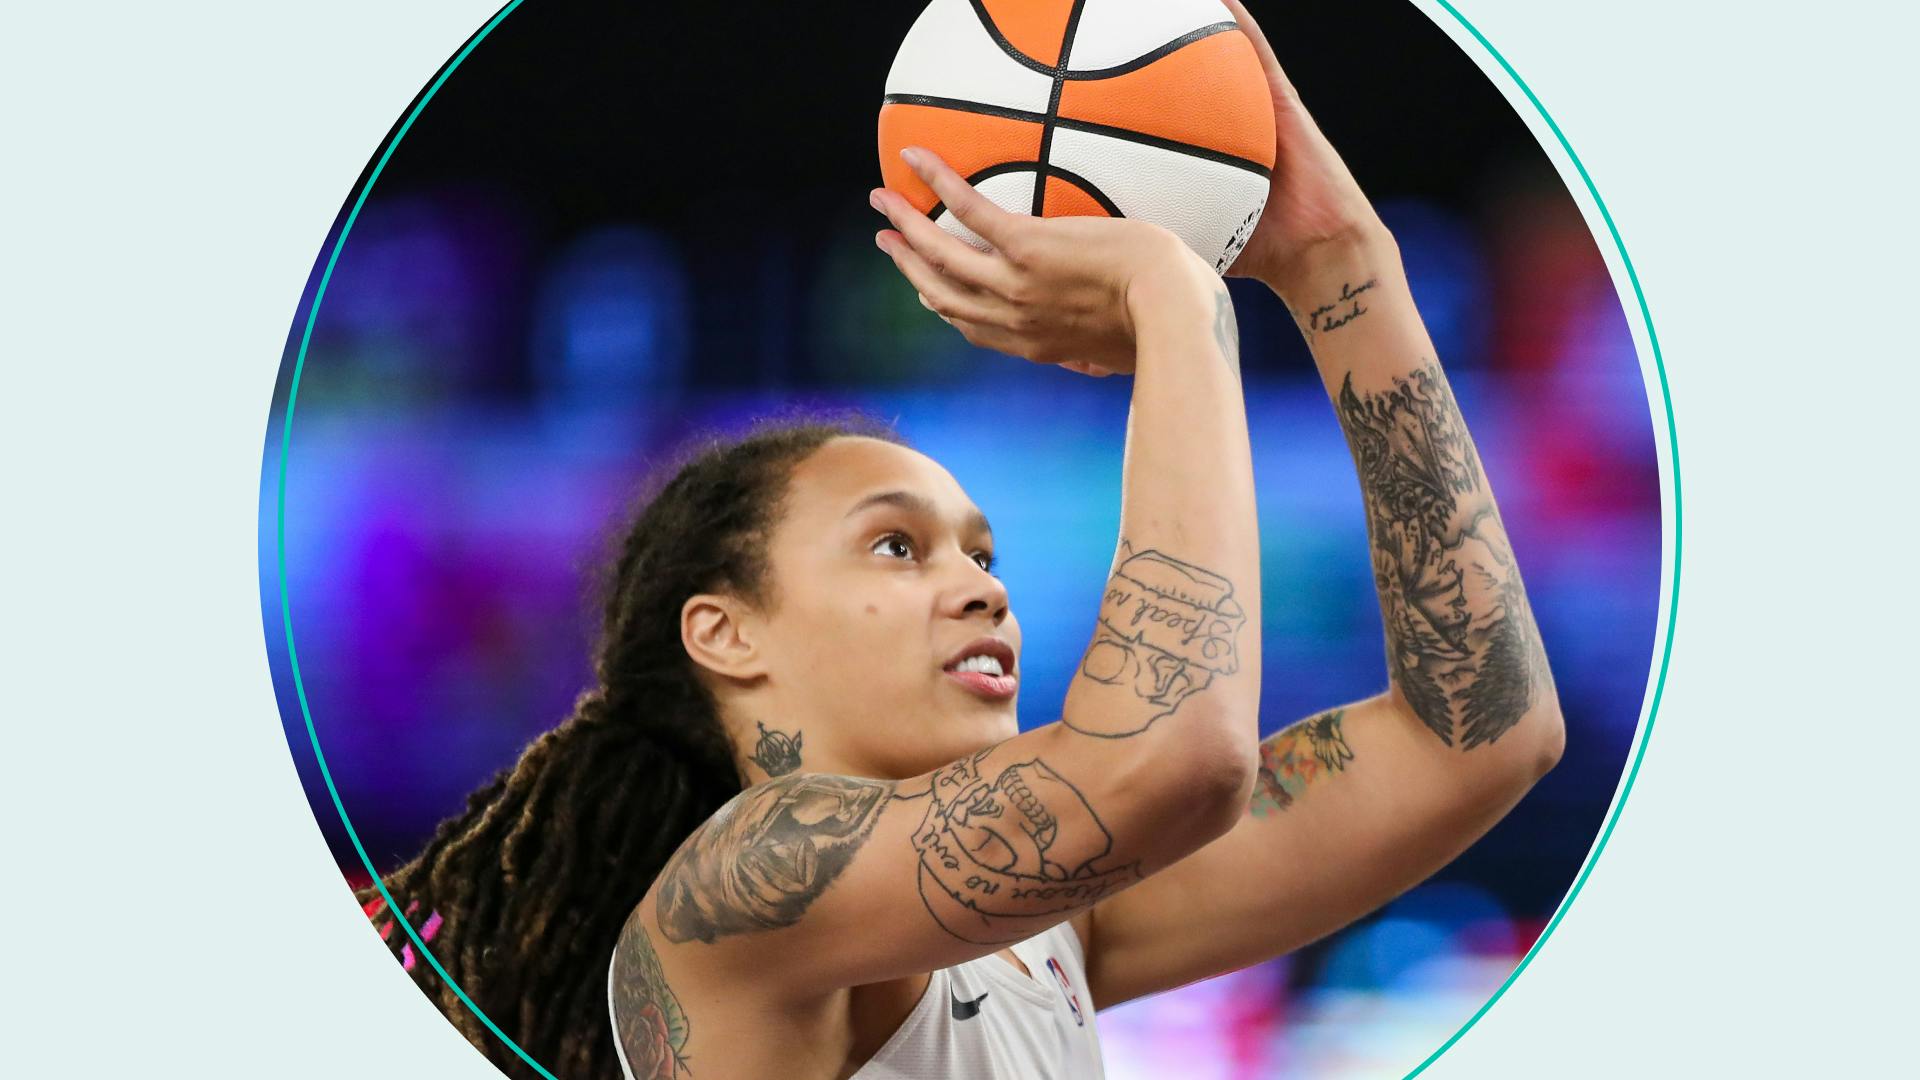 Center Brittney Griner #42 of the Phoenix Mercury warms up before the game against the Los Angeles Sparks at Los Angeles Convention Center on June 18, 2021 in Los Angeles, California